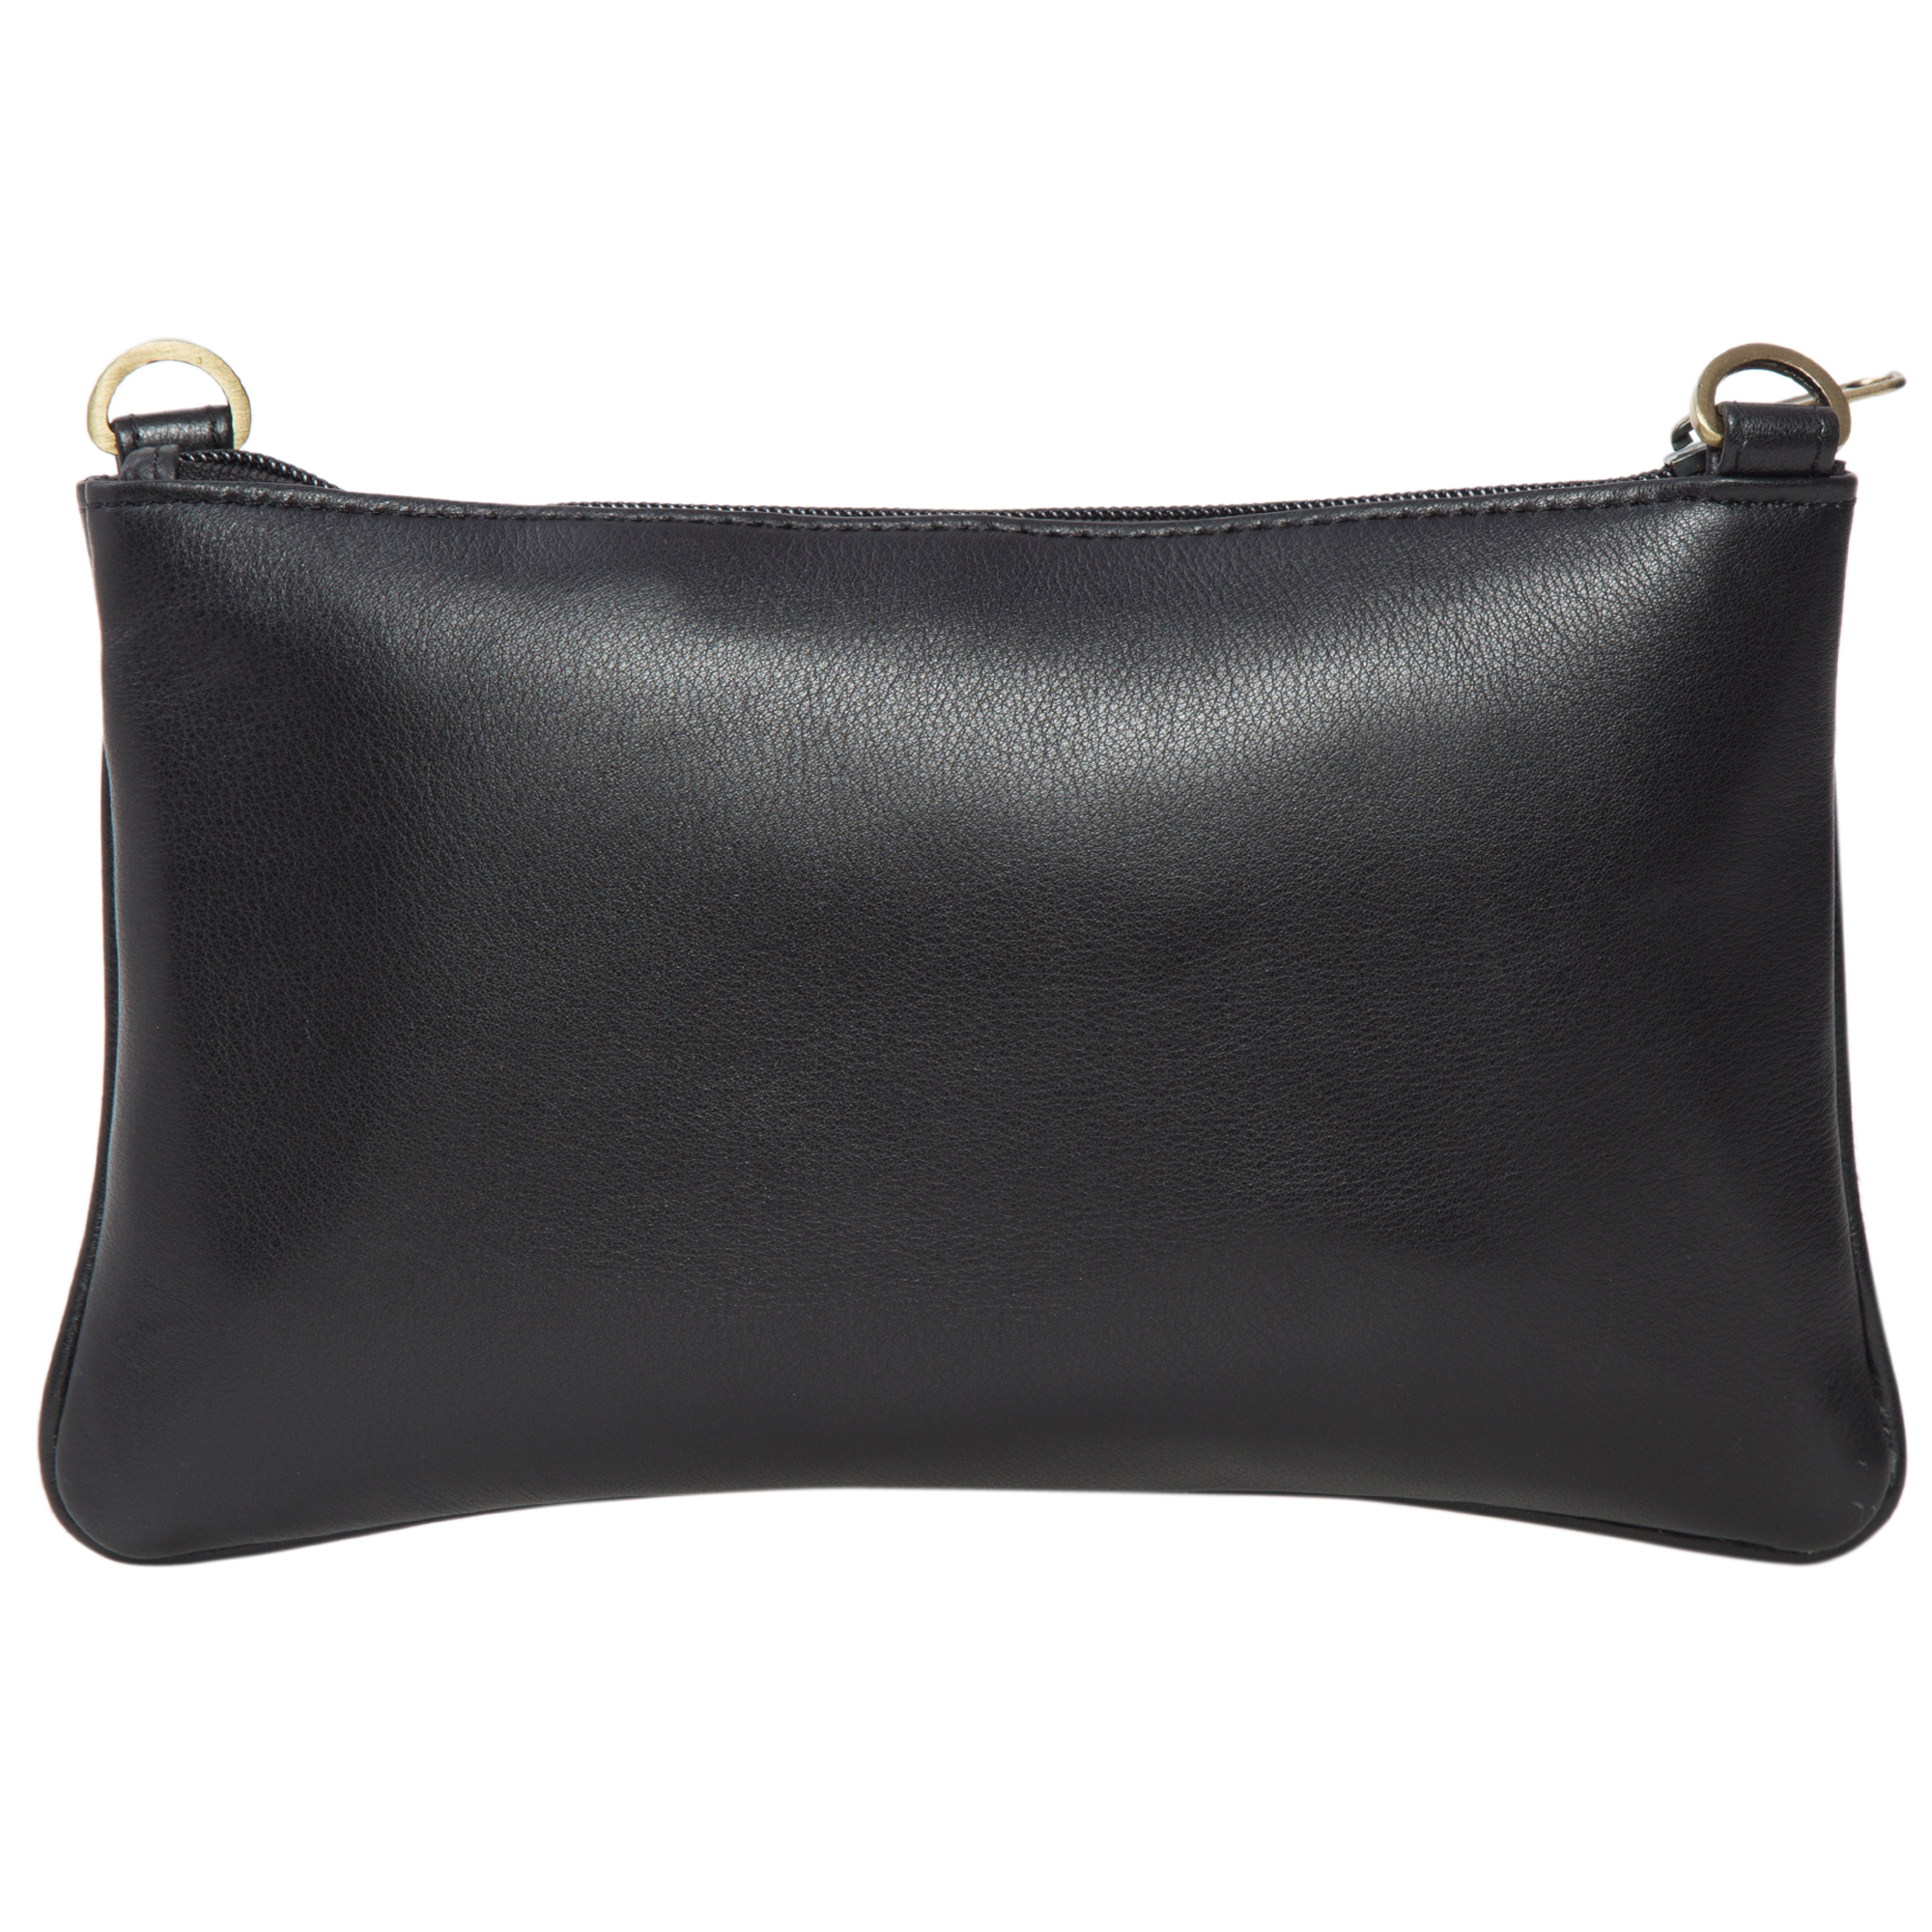 Germany – Black And White Cowhide Clutch. Cowhide Clutch Bags